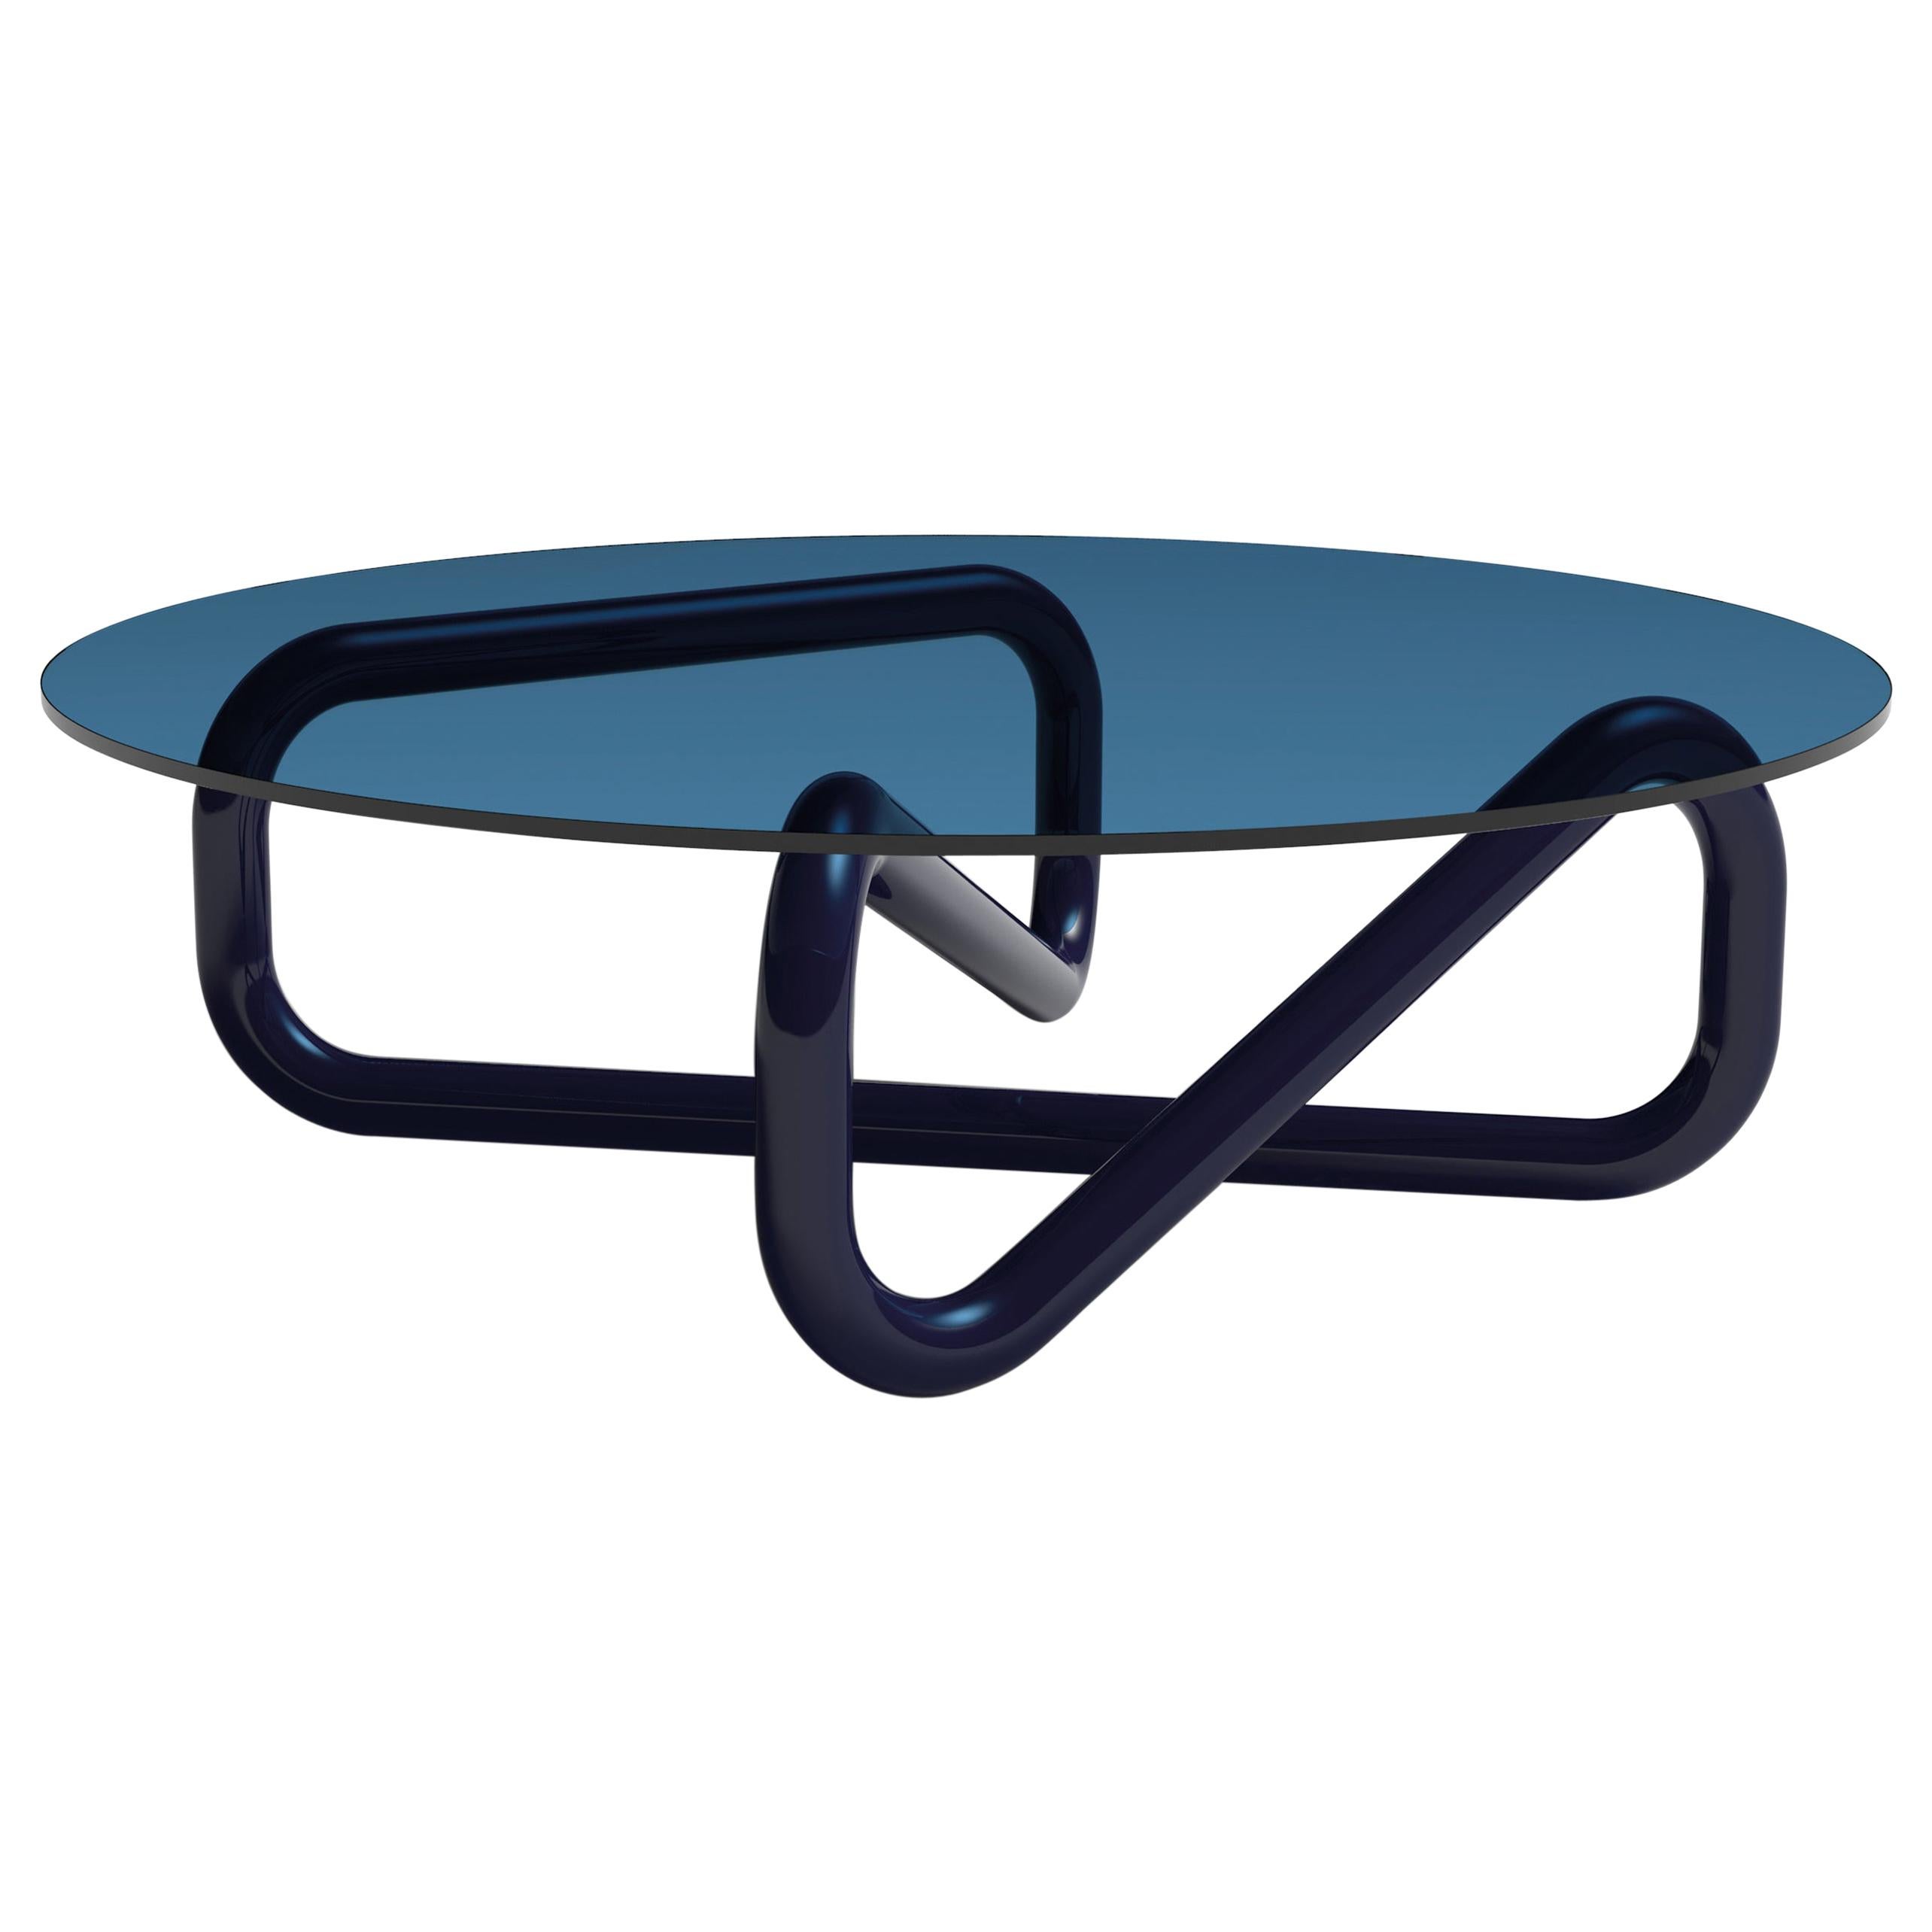 Arflex Infinity 130cm  Small Table in Light Blue Glass by Claesson Koivisto Rune For Sale